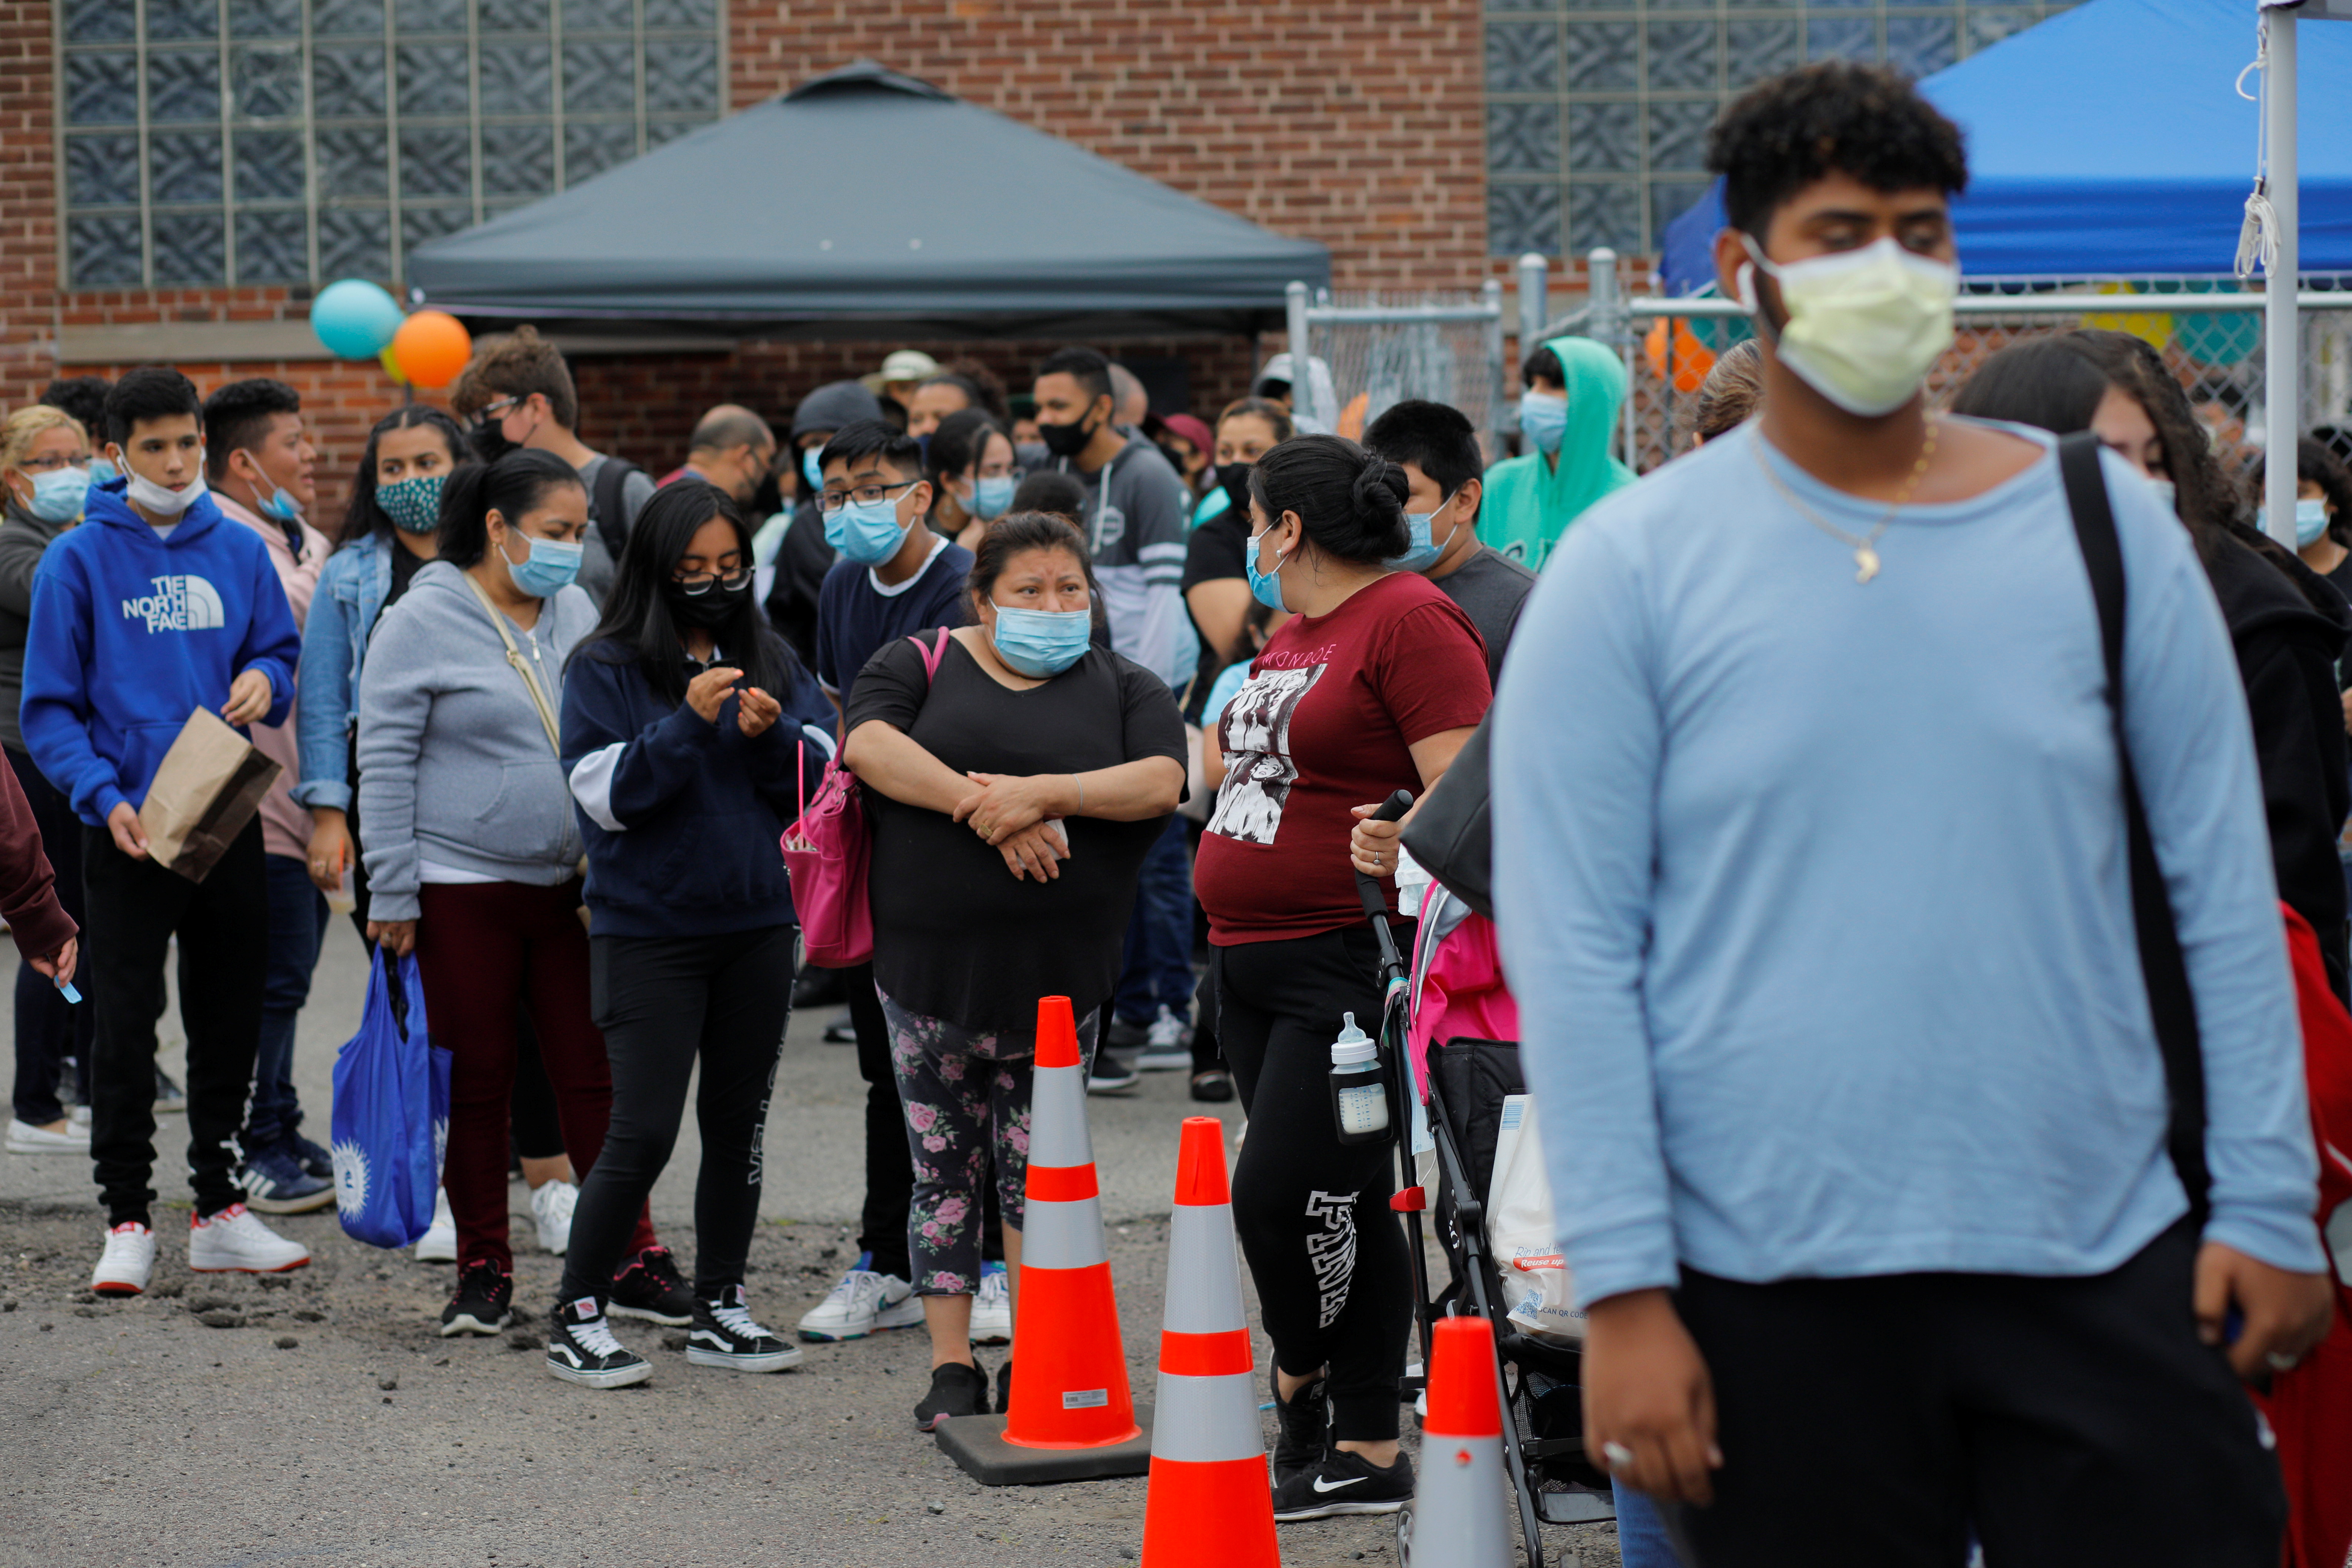 Residents line up for a COVID-19 vaccine clinic in Chelsea